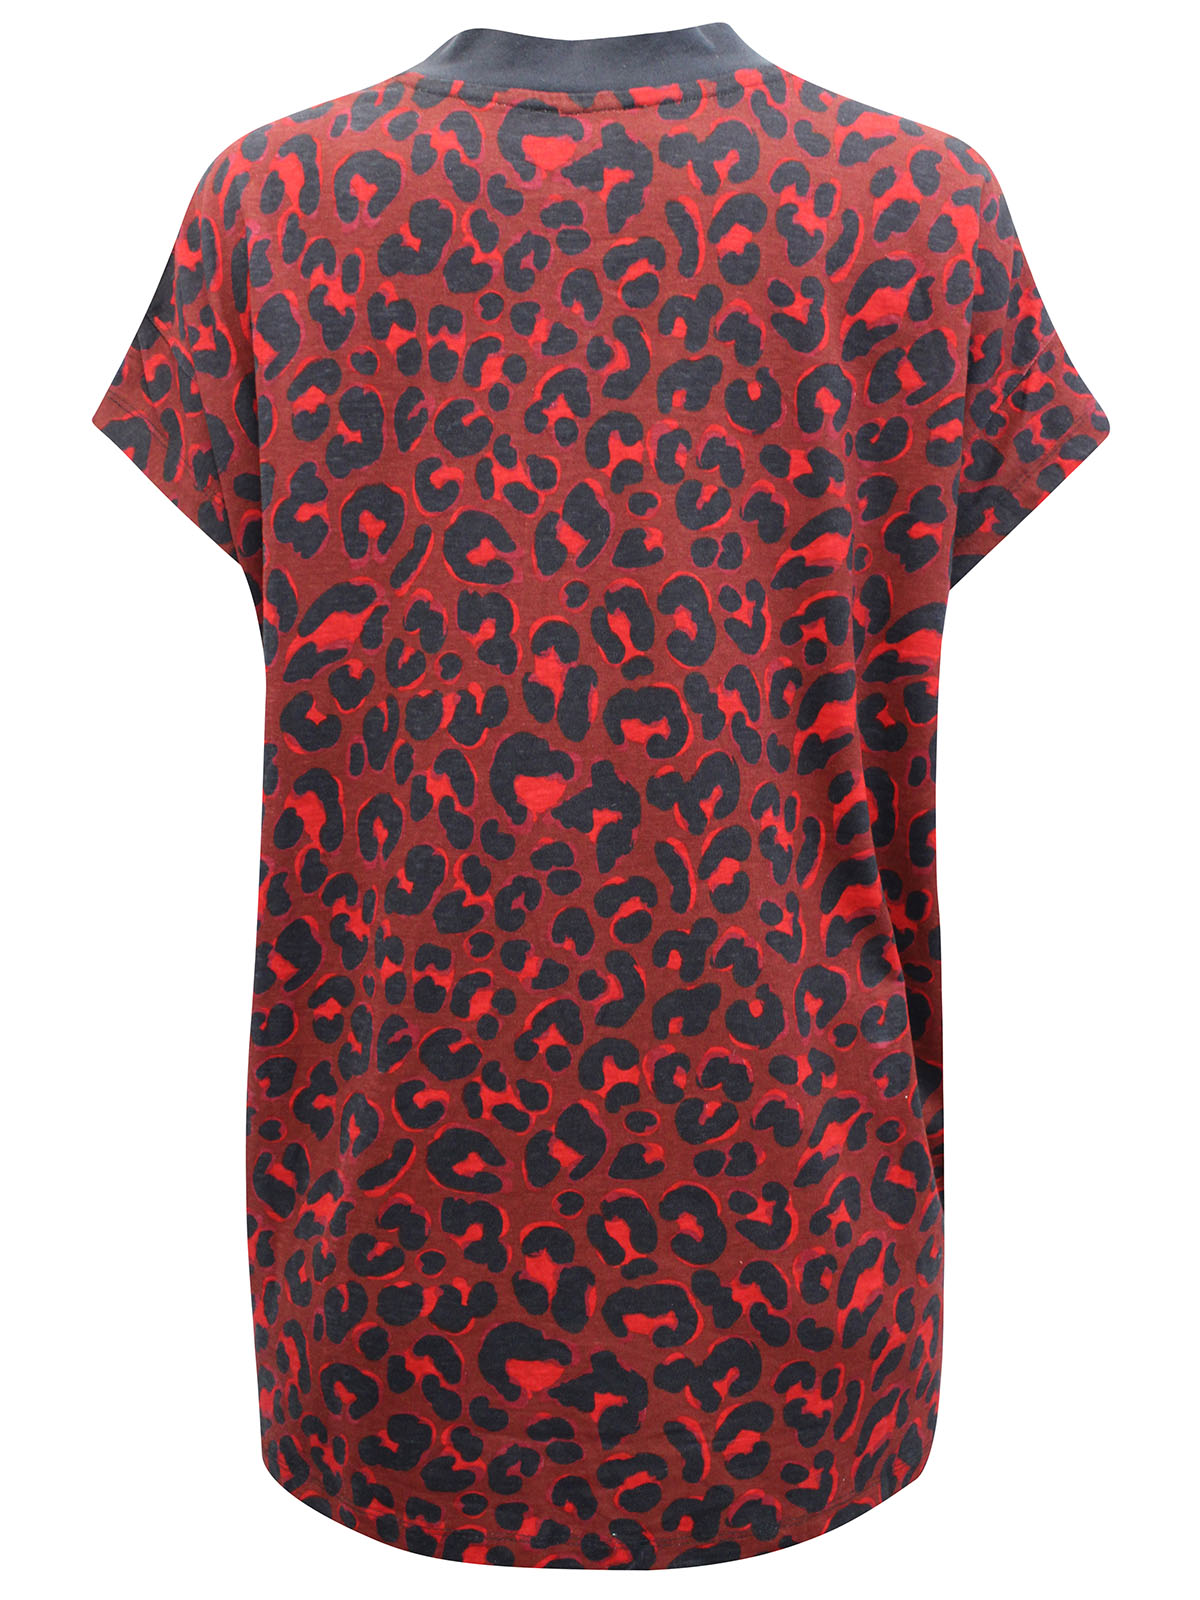 Plus Size wholesale clothing by simply be - - SimplyBe RED Animal Print ...